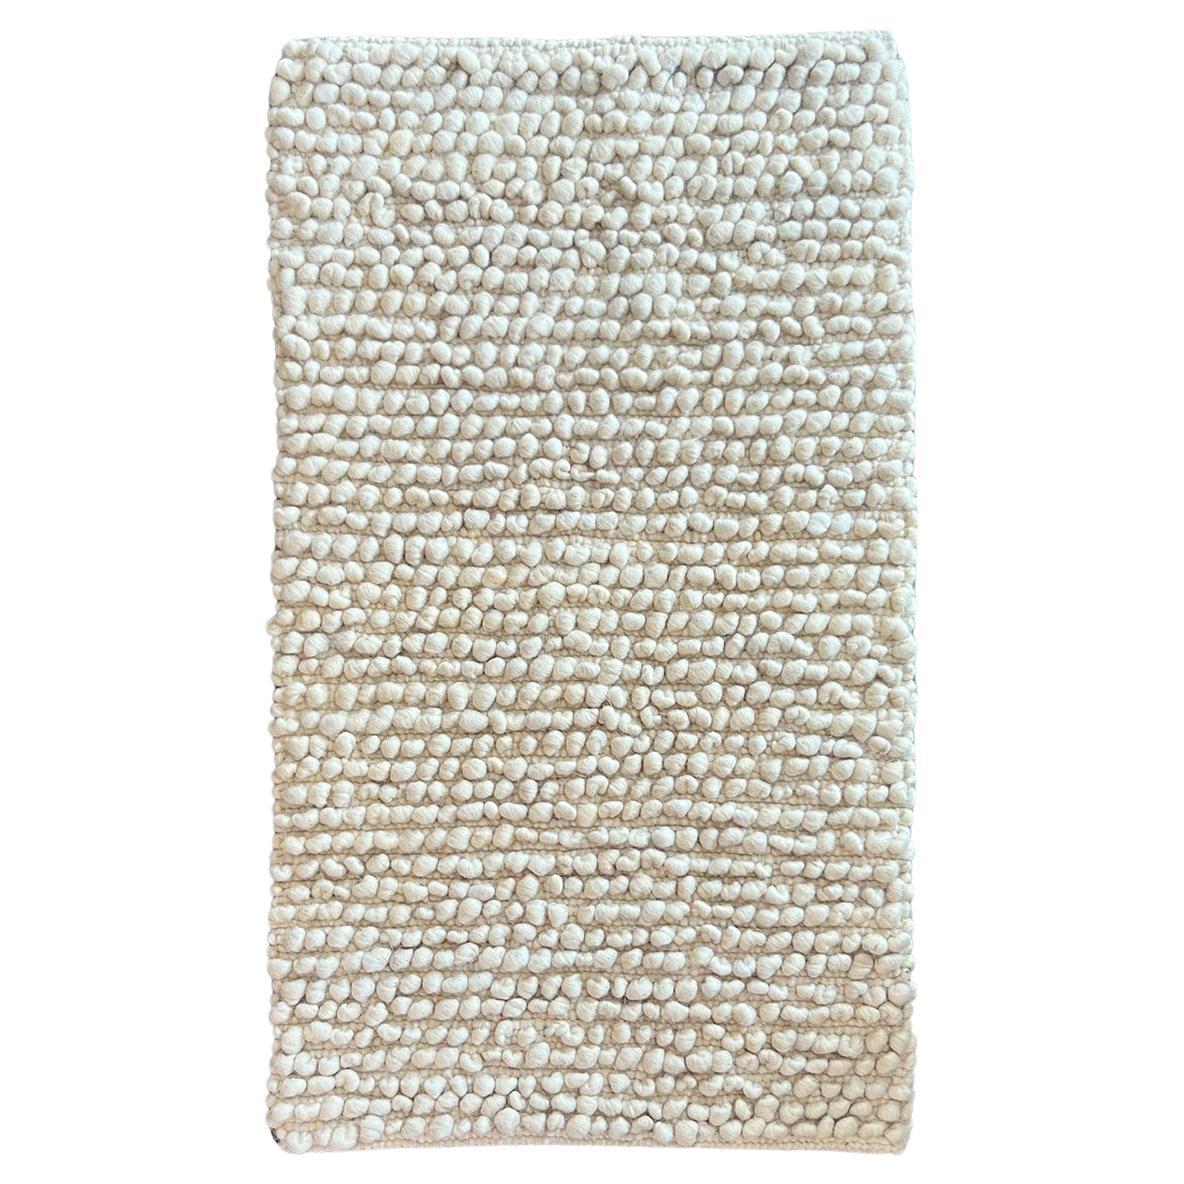 Fatima Bobble Sheep Wool Area Rug in White 2.5ft by 4ft, Handmade For Sale